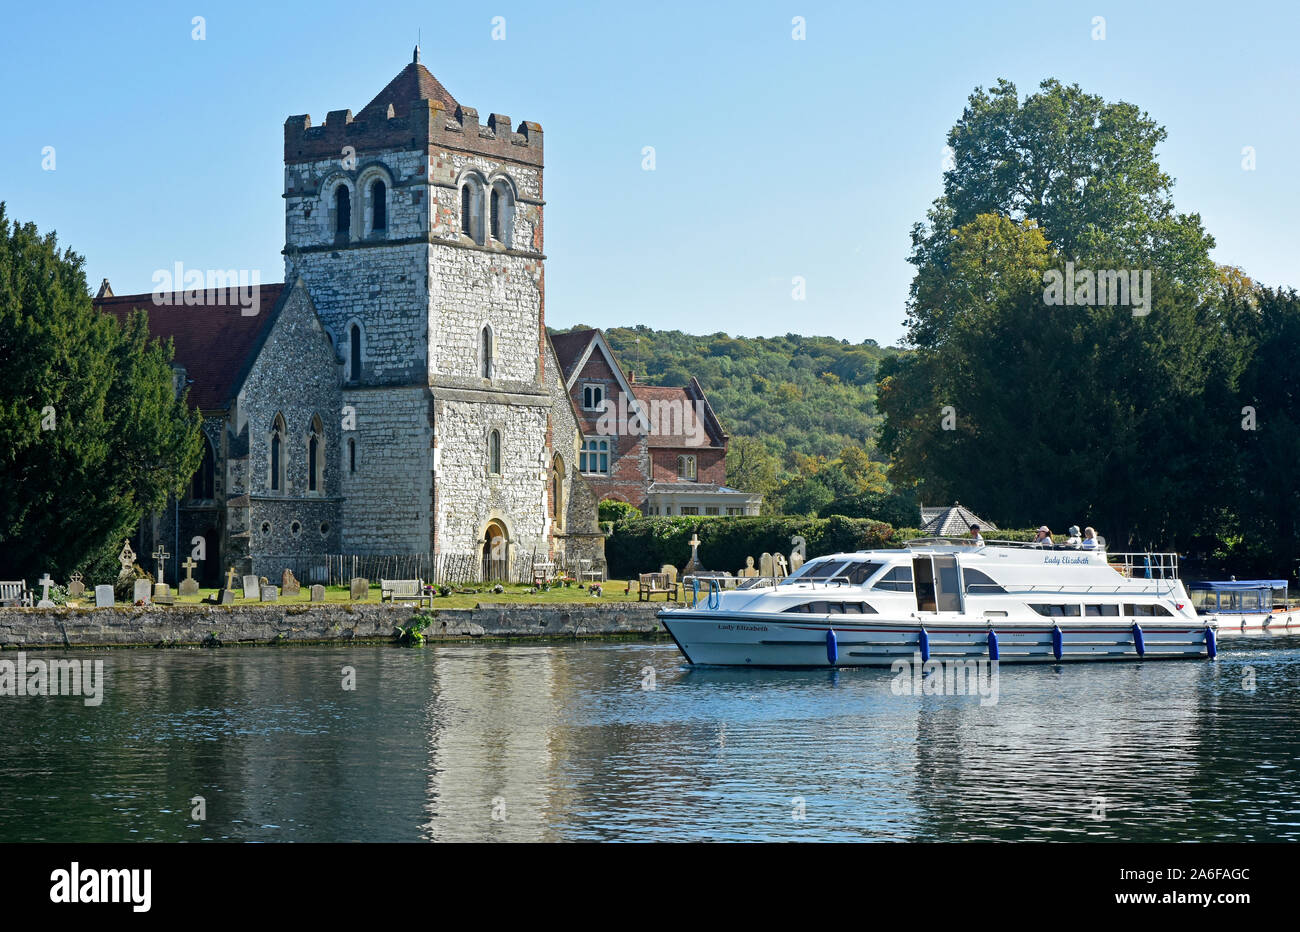 Berkshire - River Thames - Bisham church - passing river cruiser - reflections - summer day - sunlight and blue sky Stock Photo